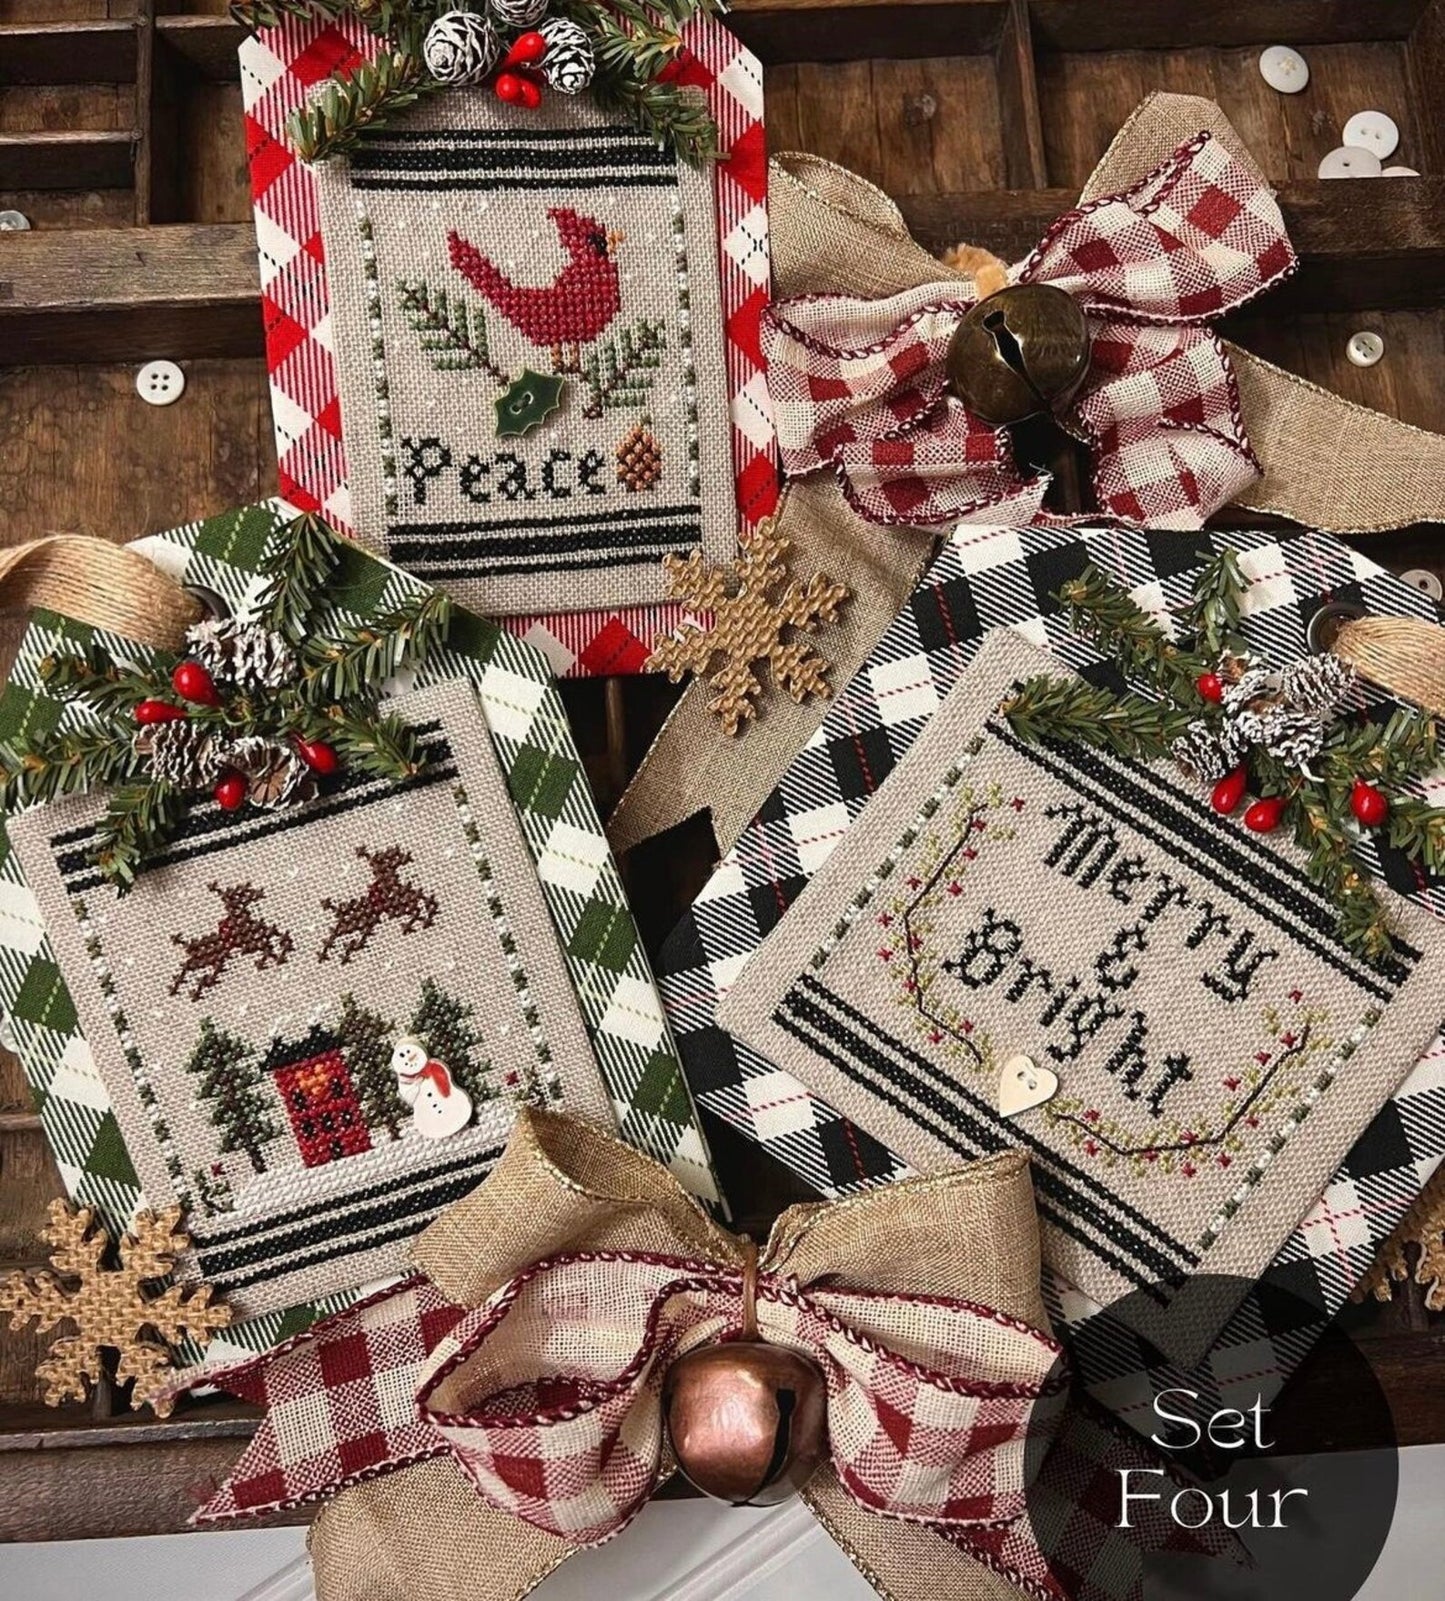 Christmas in the Country Set 4 cross-stitch pattern by Annie Beez Folk Art